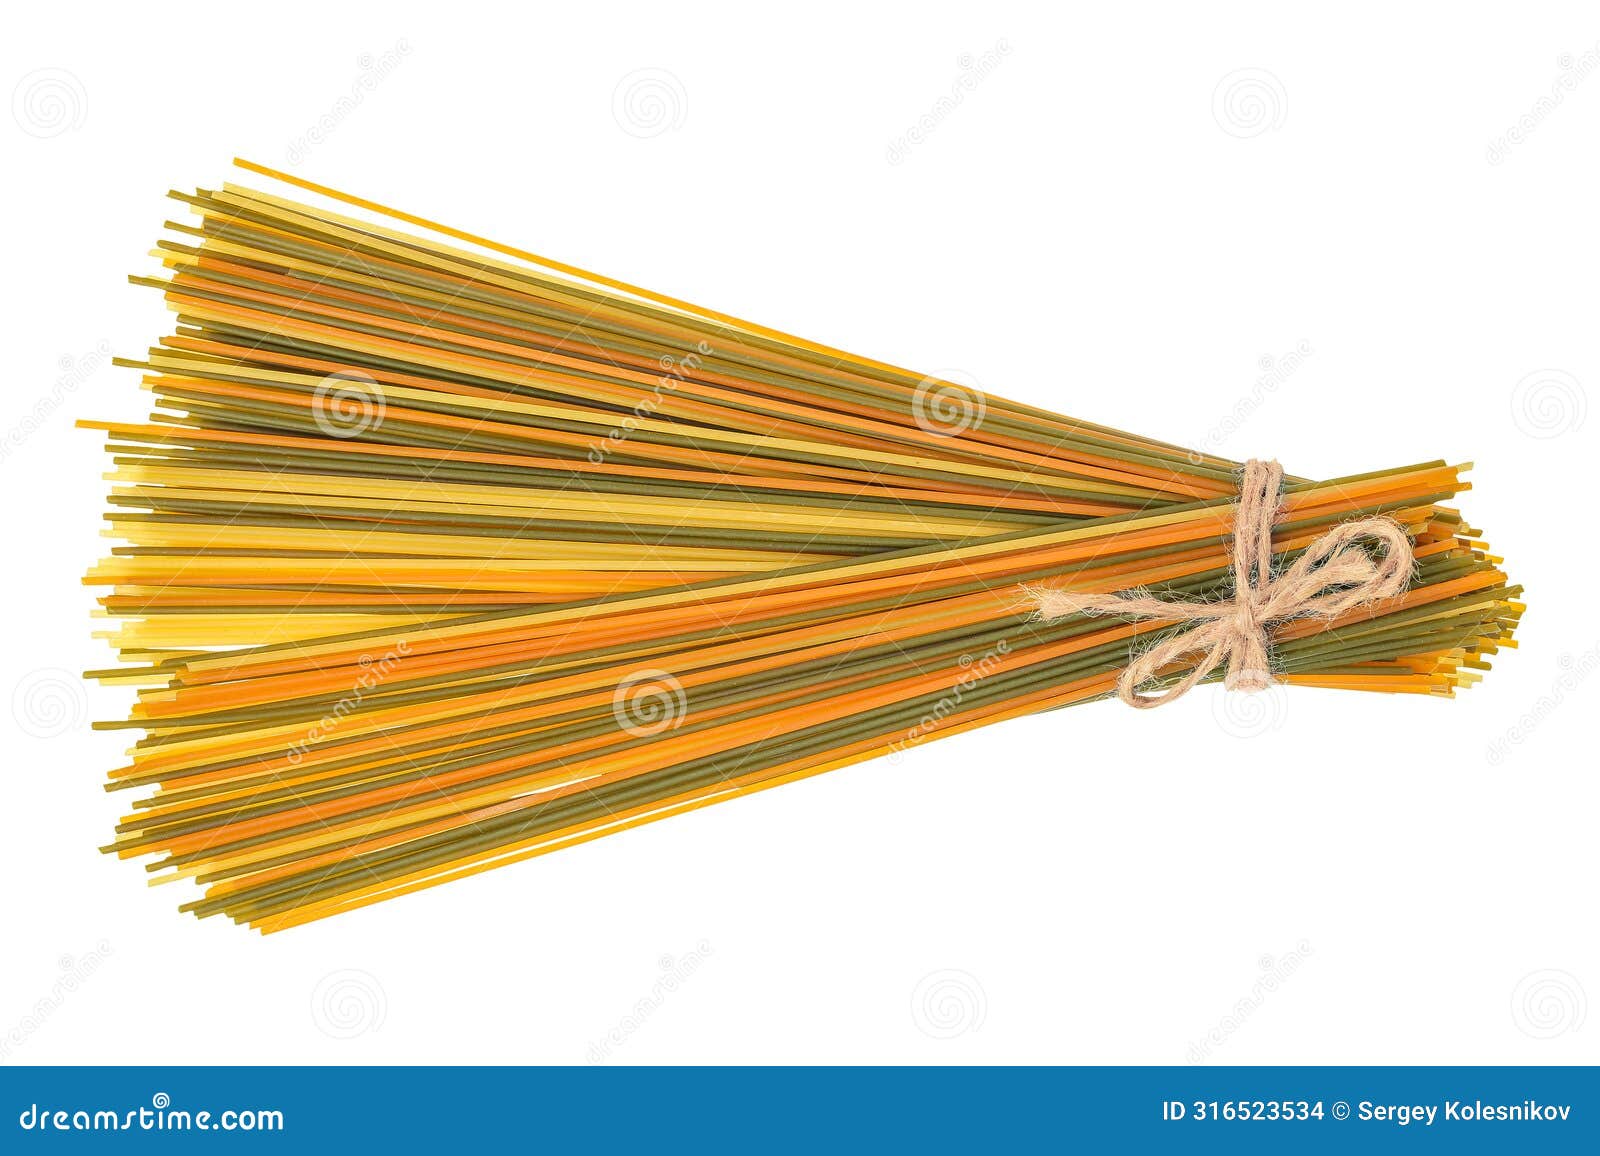 colorful spaghetti tricolore pasta  on white background. top view. flat lay